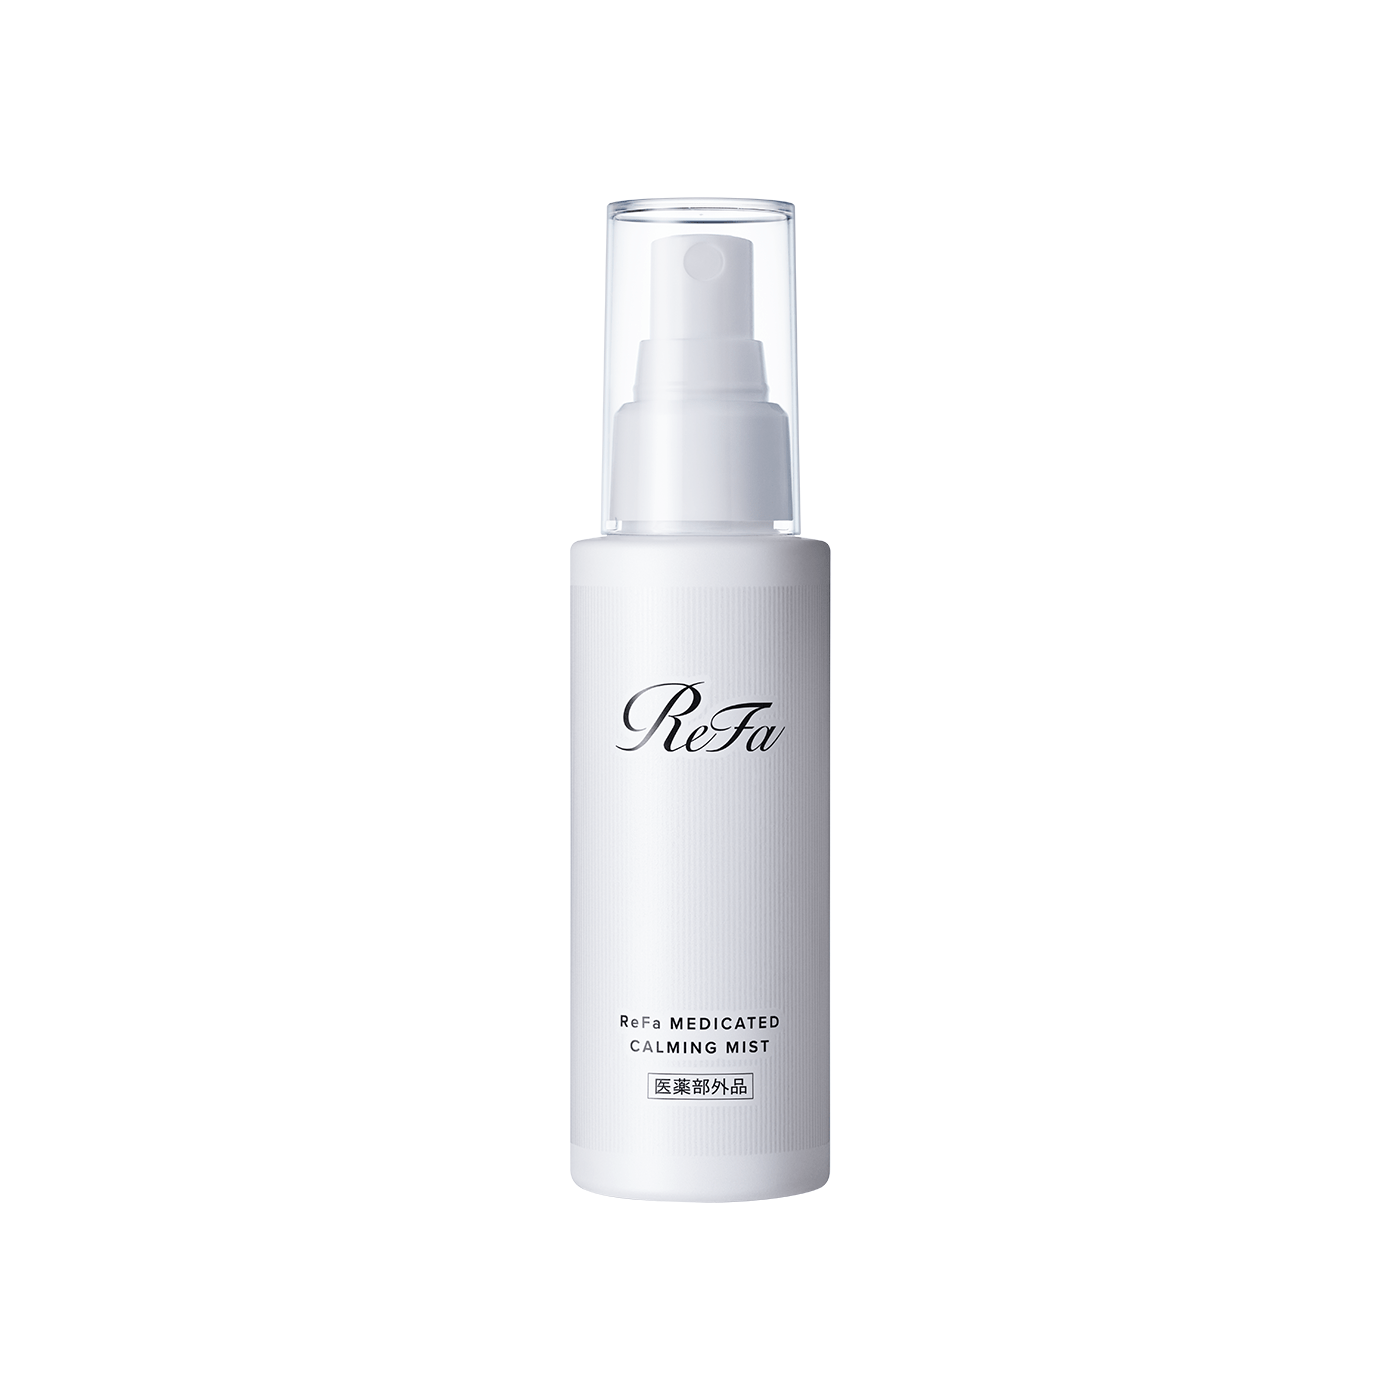 Spray goodbye to dryness and irritation: A medicated mist for quick hair removal aftercare. ReFa MEDICATED CALMING MIST launches on Monday, May 16!